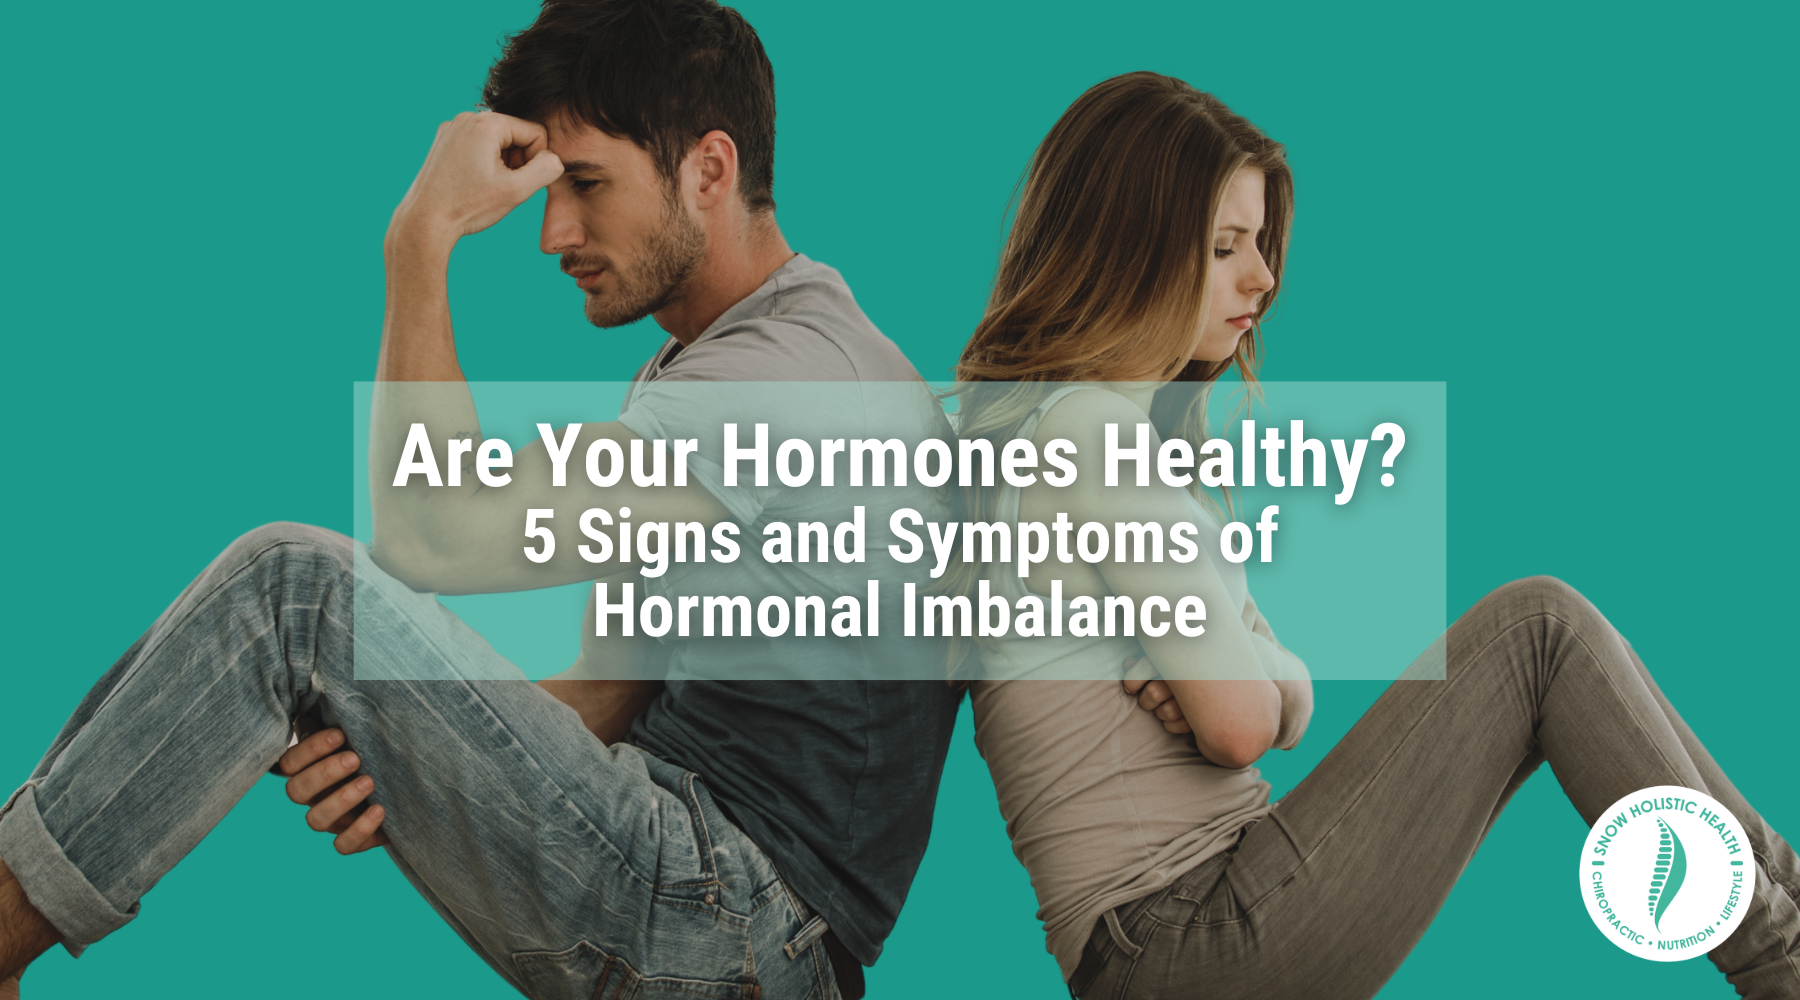 Image includes man and woman sitting back to back with caption "Are Your Hormones Healthy? 5 Signs and Symptoms of Hormonal Imbalance"